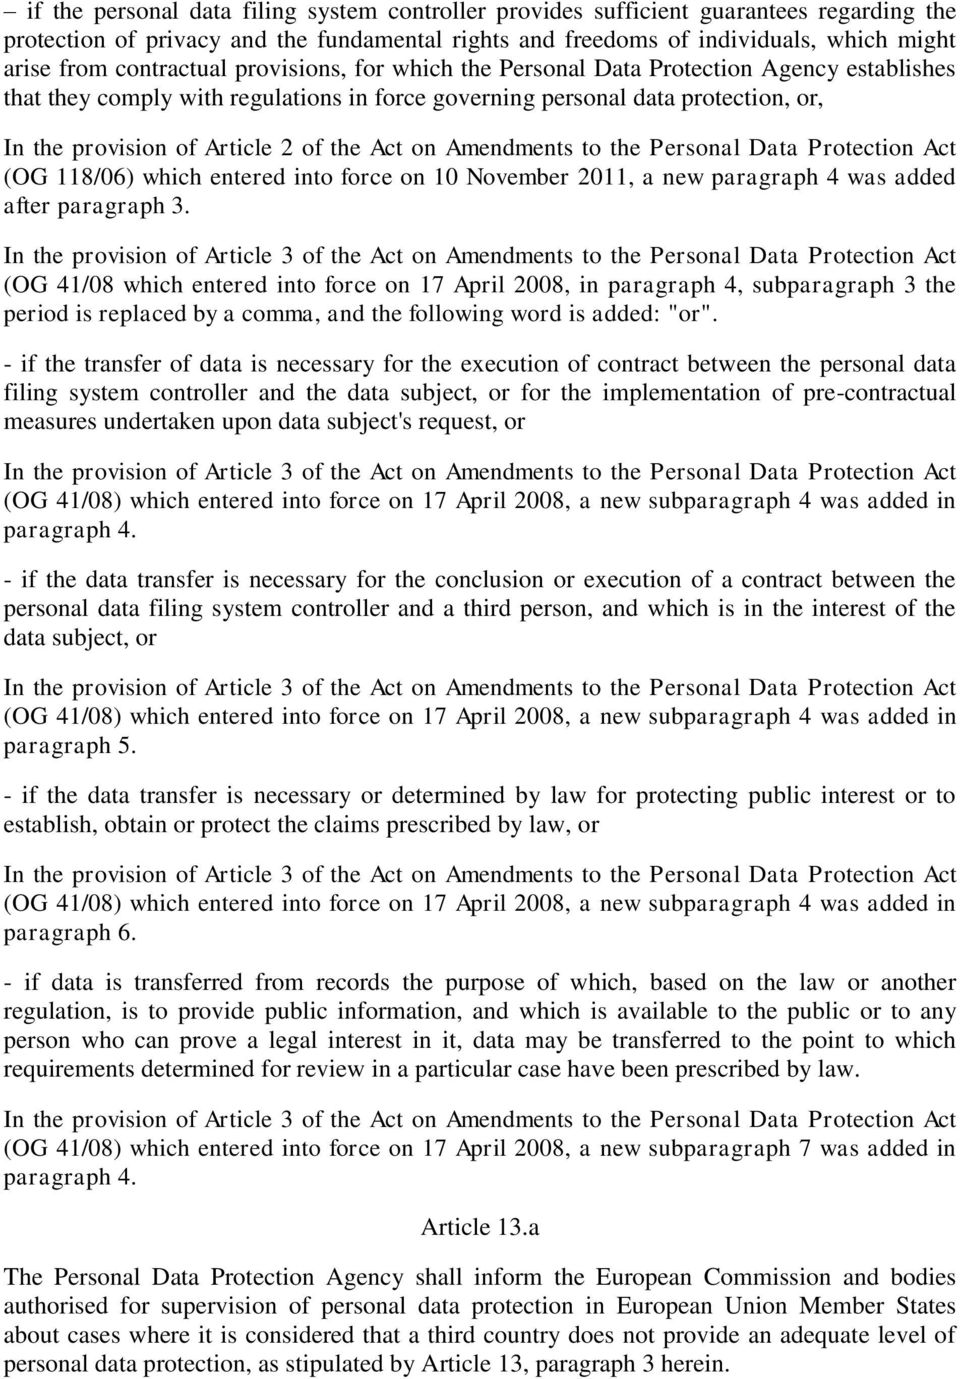 the Act on Amendments to the Personal Data Protection Act (OG 118/06) which entered into force on 10 November 2011, a new paragraph 4 was added after paragraph 3.